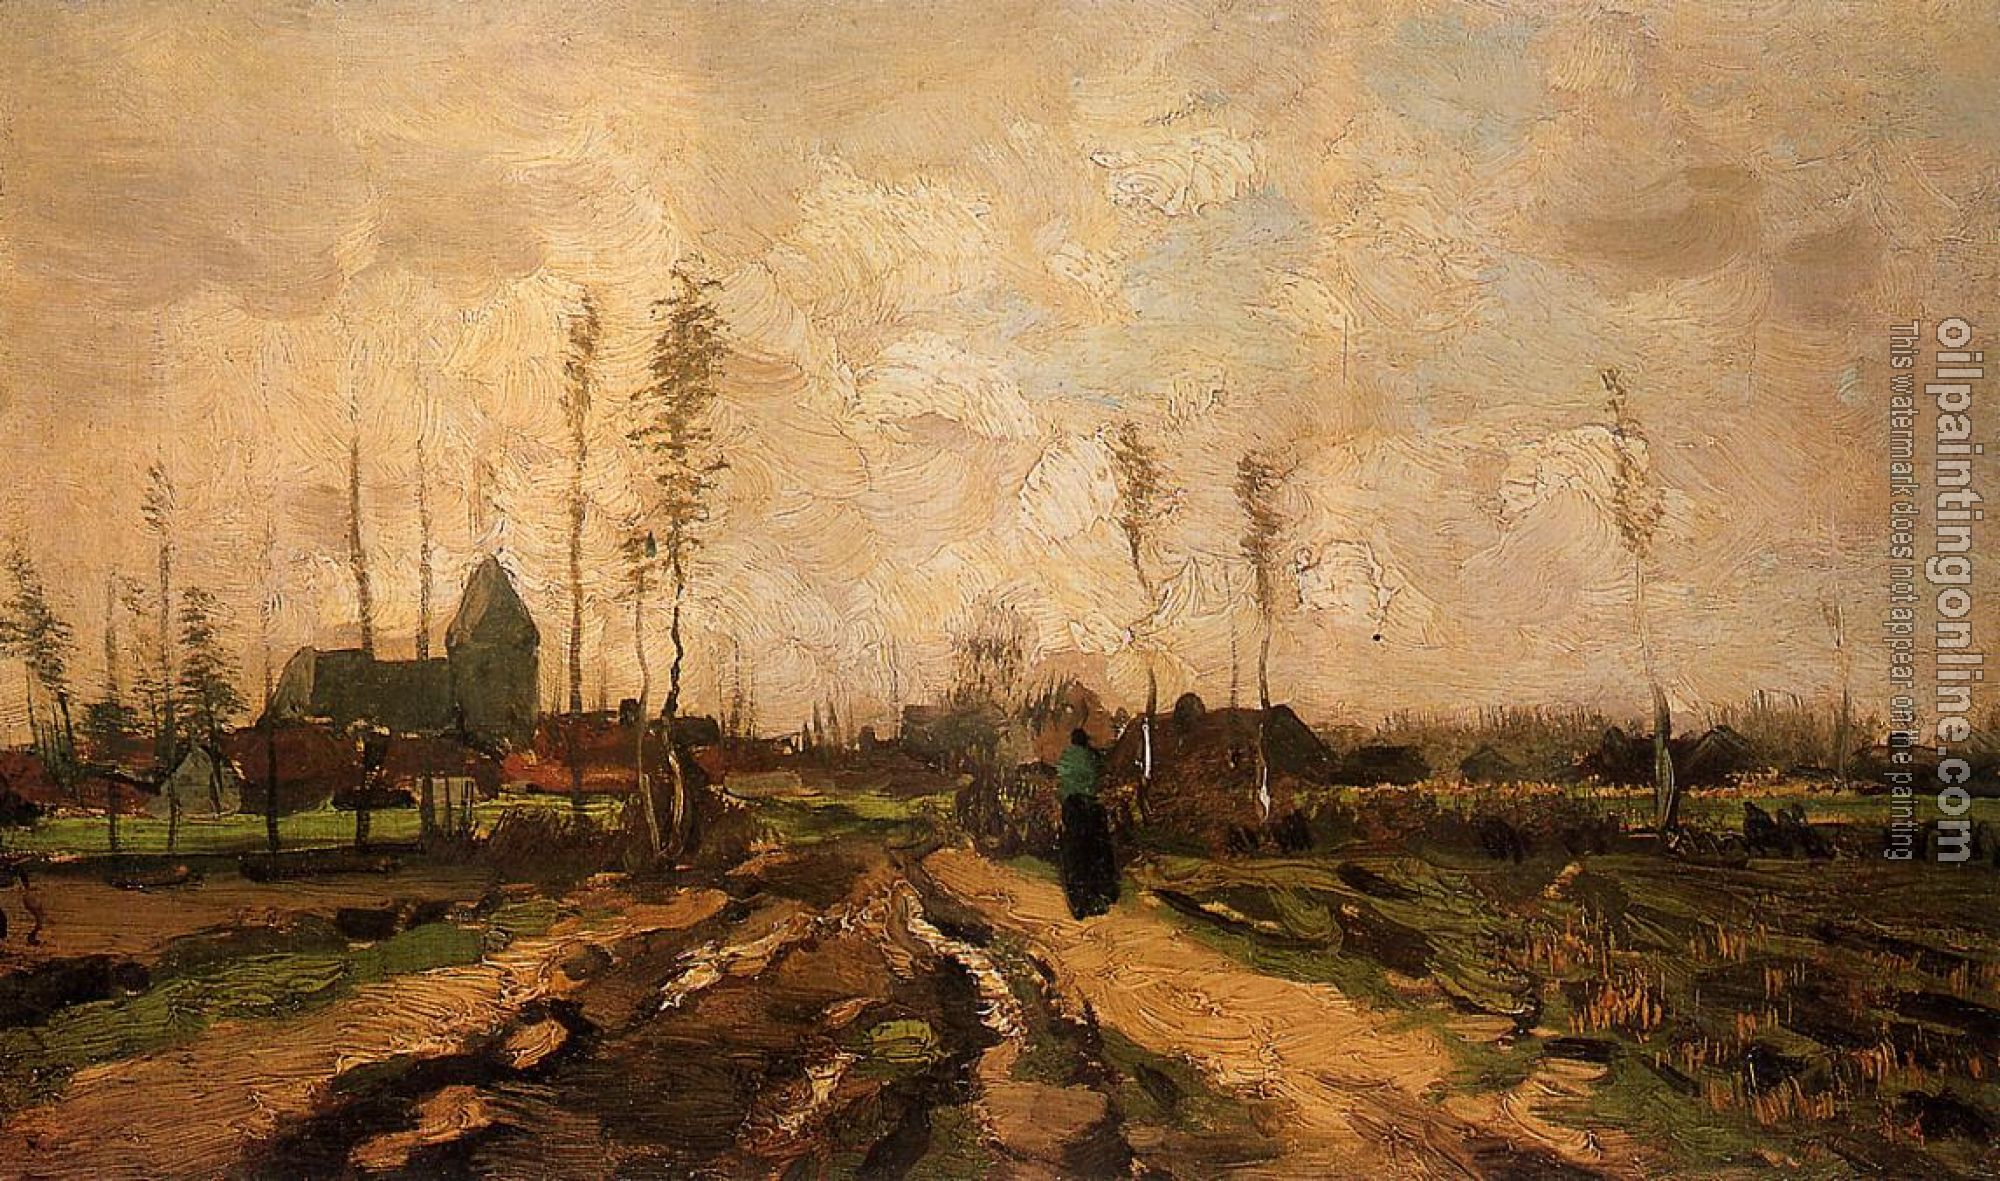 Gogh, Vincent van - Landscape with Church and Farms